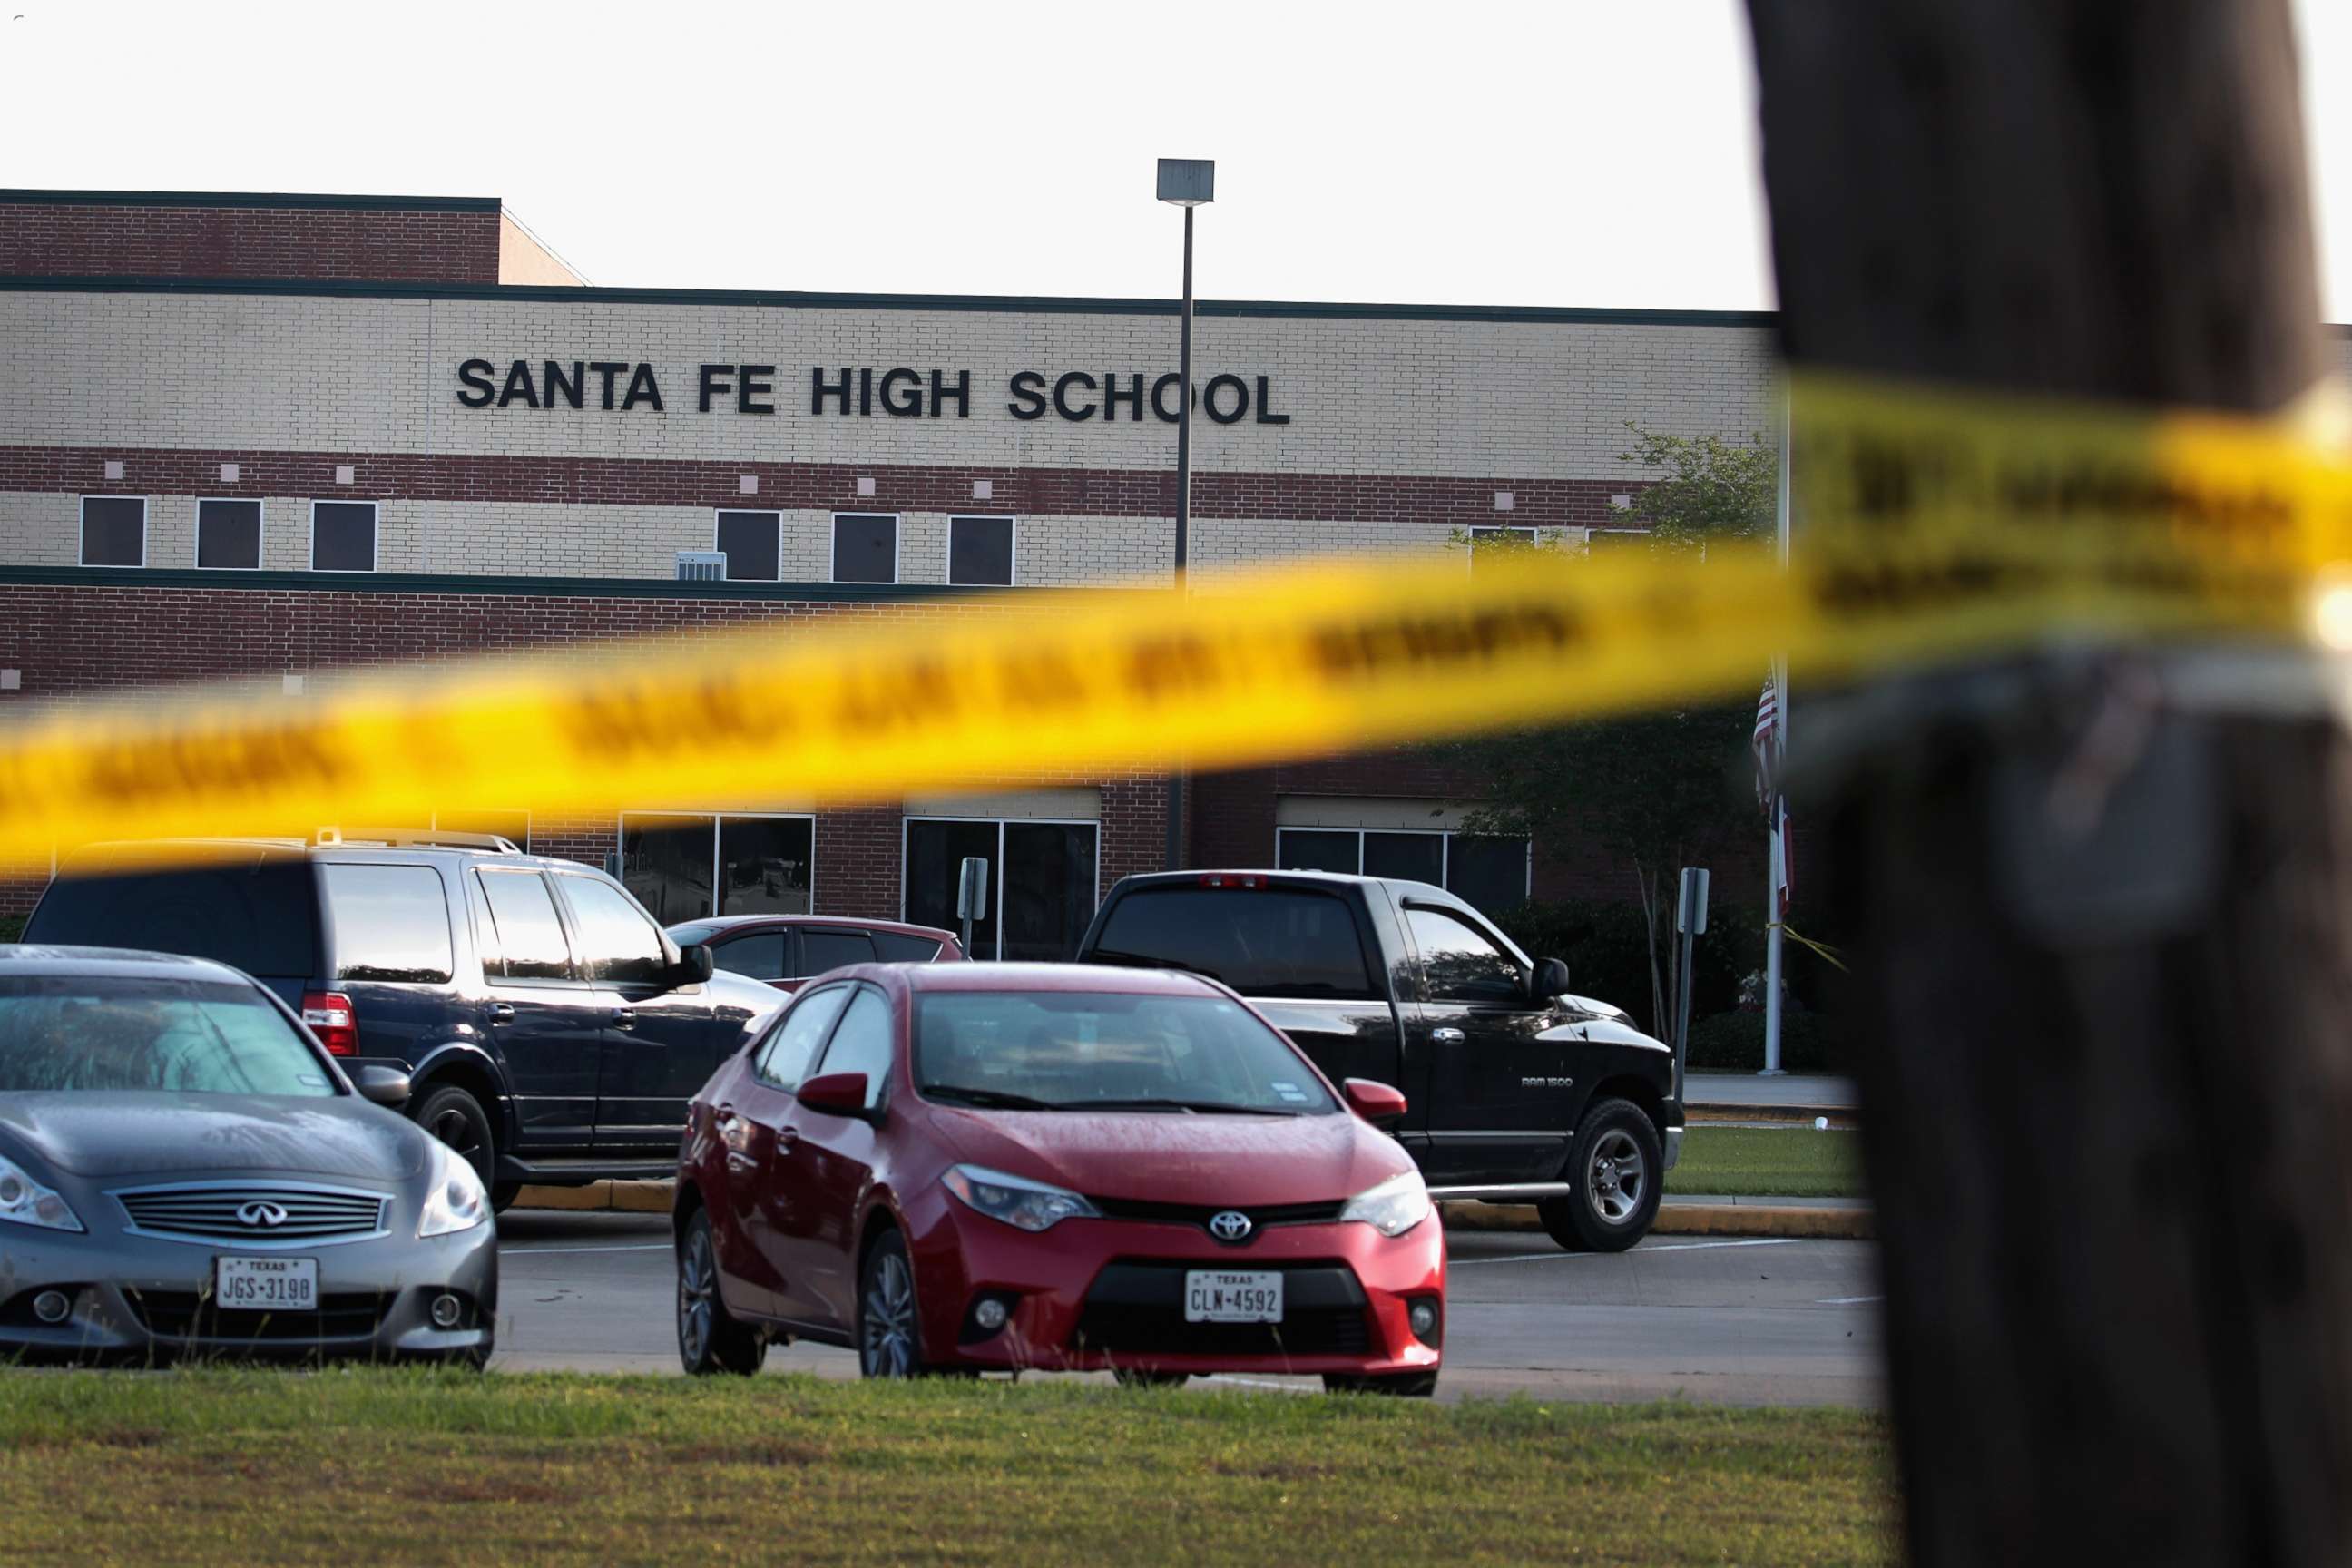 PHOTO: Crime scene tape is stretched across the front of Santa Fe High School on May 19, 2018 in Santa Fe, Texas.